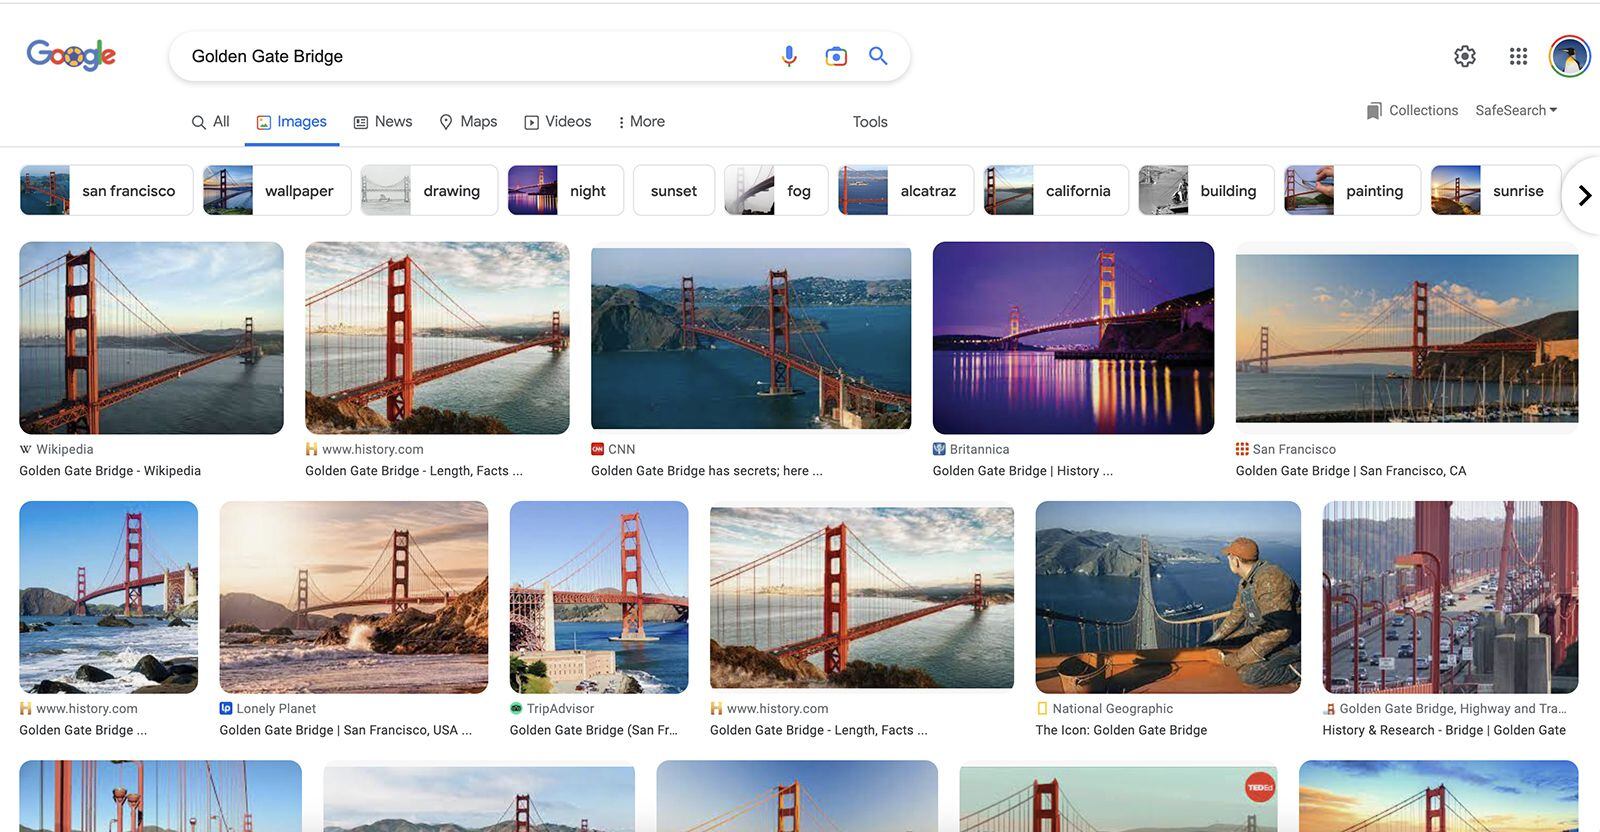 If you want to find pictures of the Golden Gate Bridge, you can search for that term and...